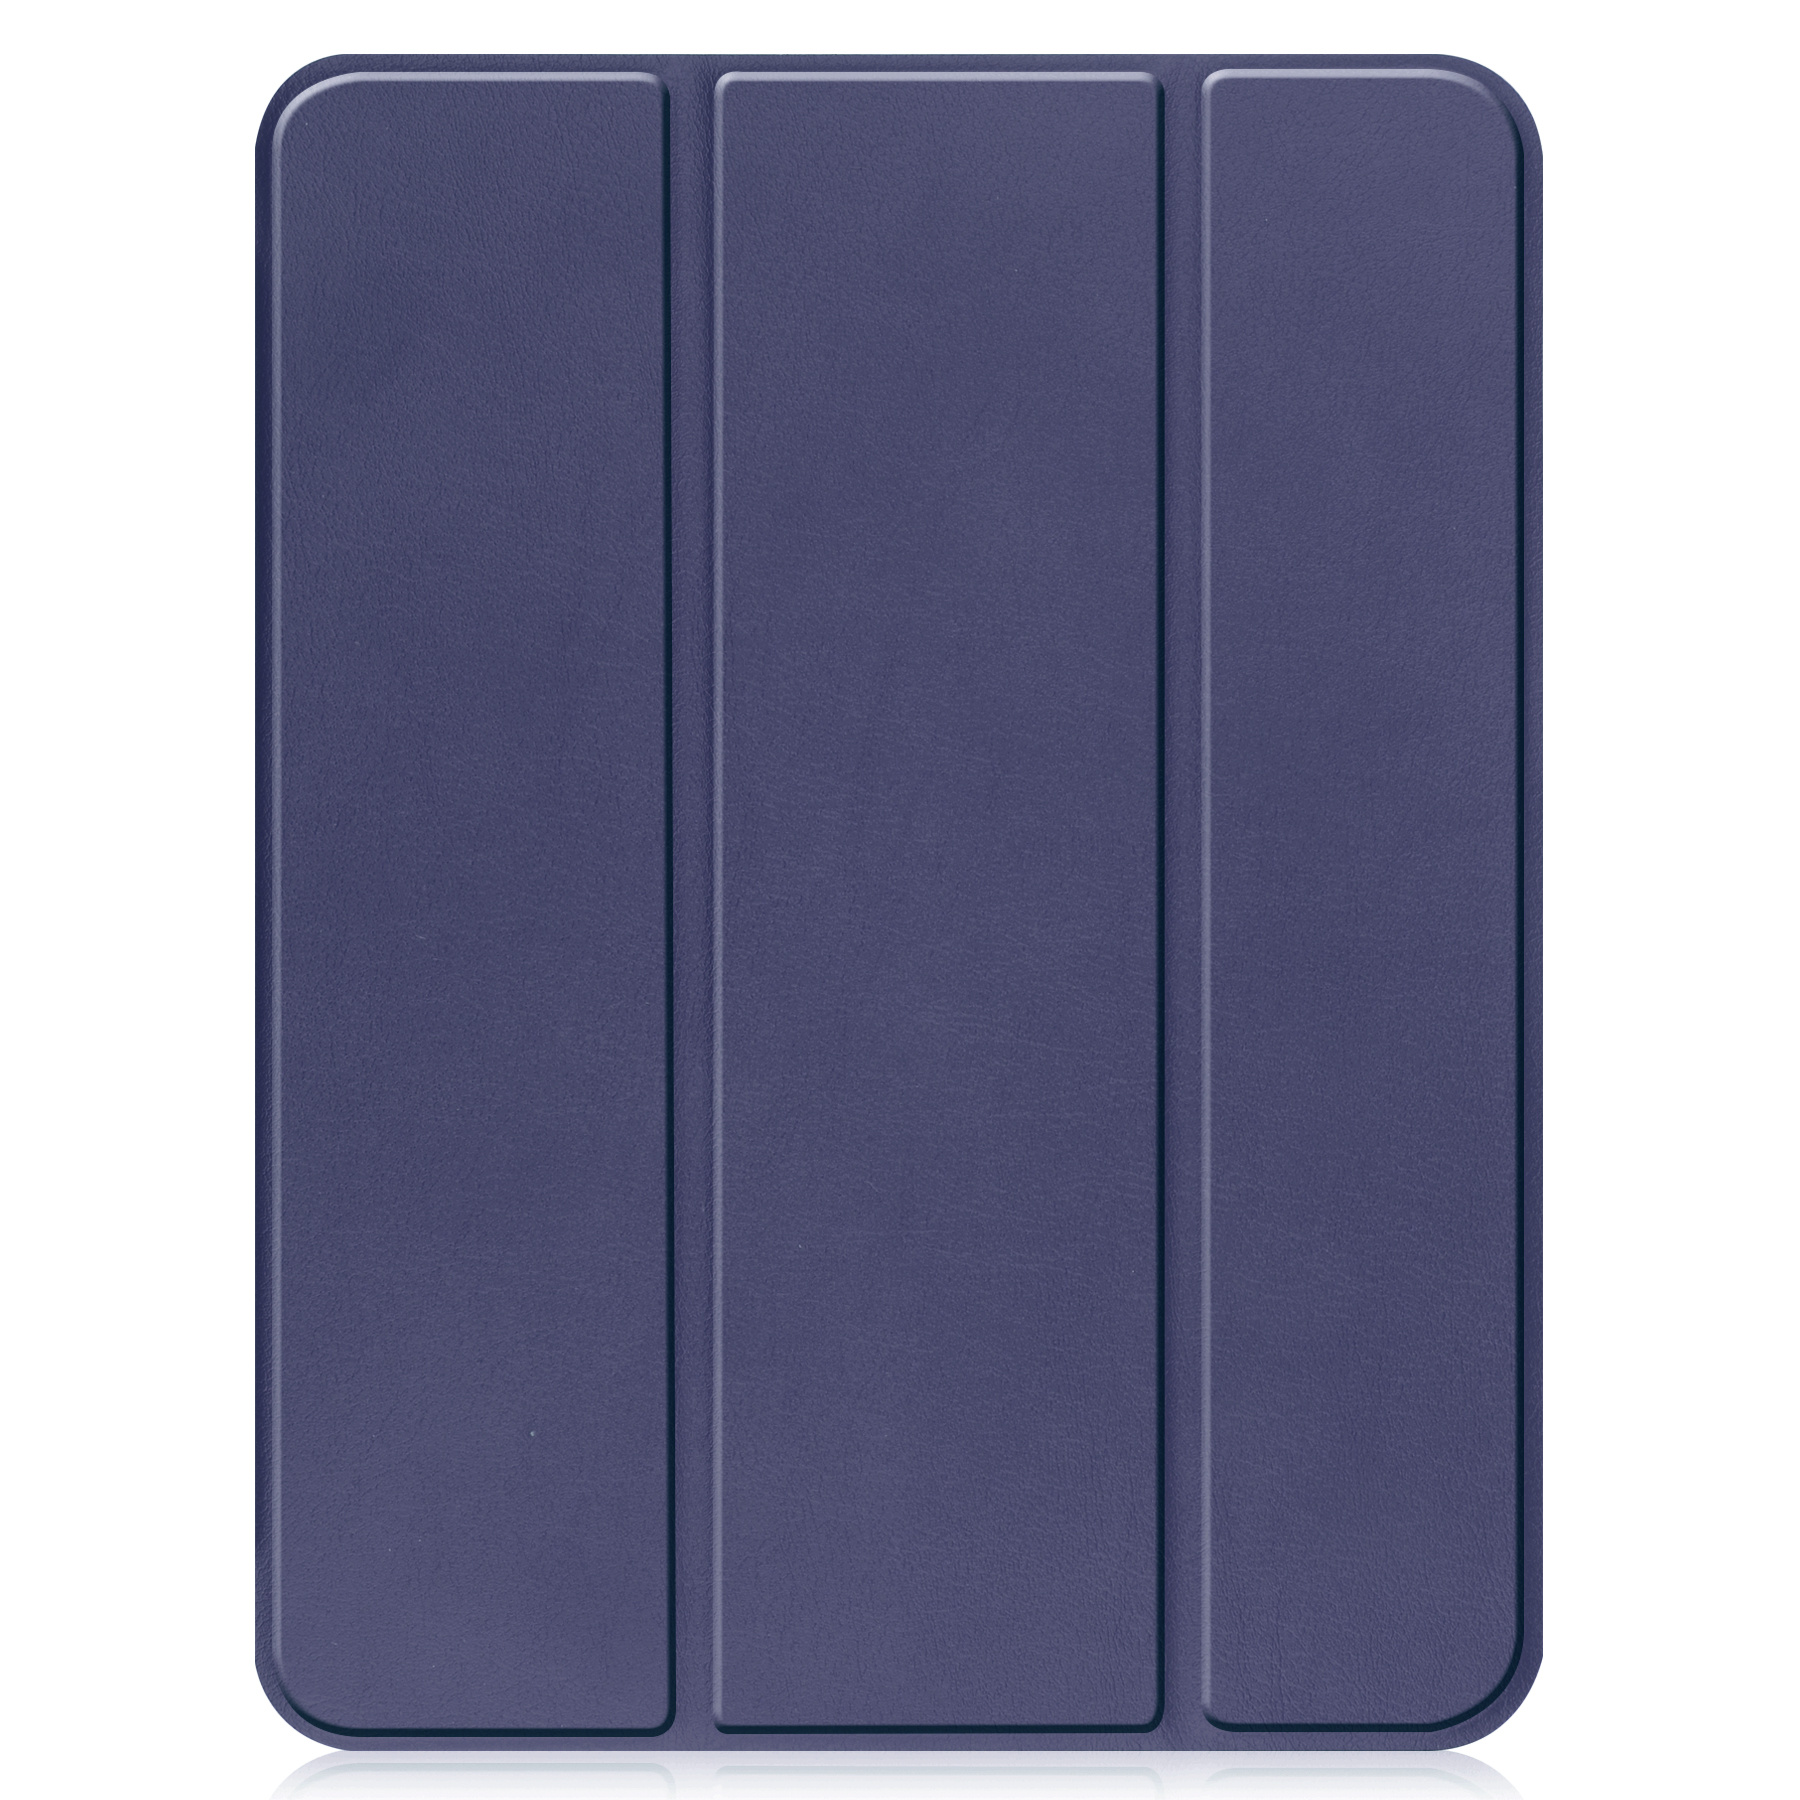 iPad 2022 Hoesje Book Case Hard Cover Hoes Met Uitsparing Apple Pencil - iPad 10 Hoes Hardcover - Donker Blauw